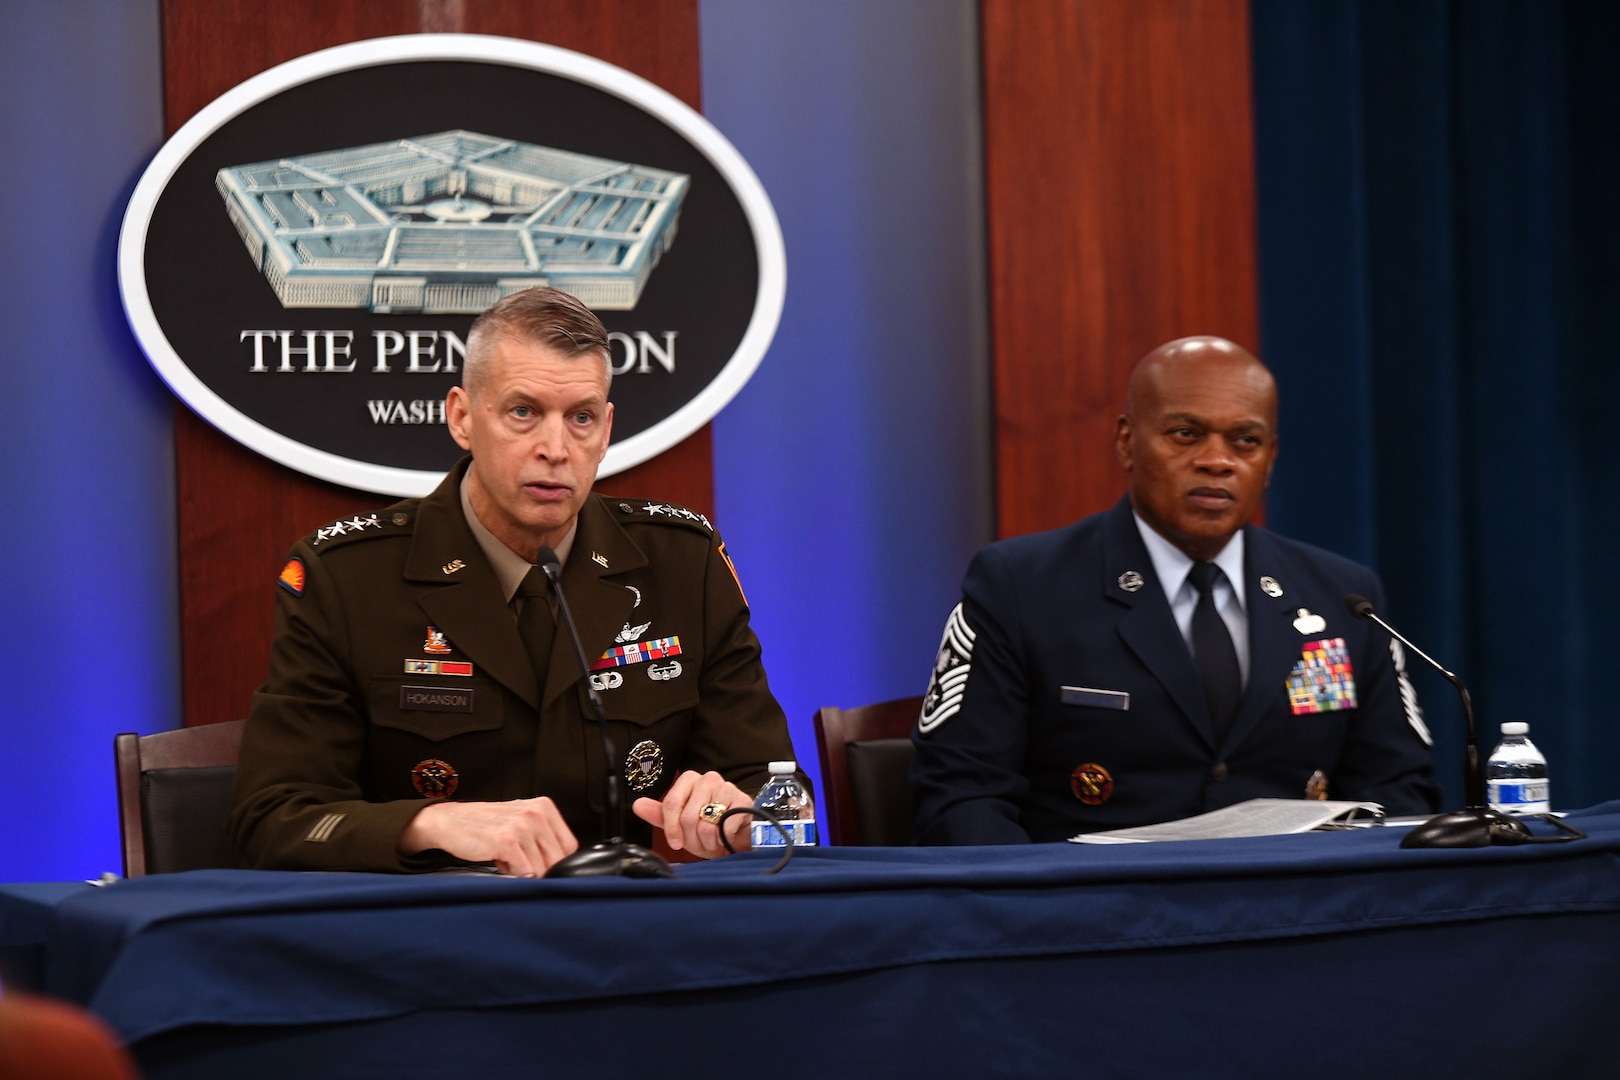 Army Gen. Daniel Hokanson, chief, National Guard Bureau, and Air Force Senior Enlisted Advisor Tony L. Whitehead, the bureau's senior enlisted advisor to the chief of the National Guard Bureau, discuss Hokanson's priorities for the National Guard -- people, readiness, modernization, and reform -- with reporters at the Pentagon Jan. 24, 2023.